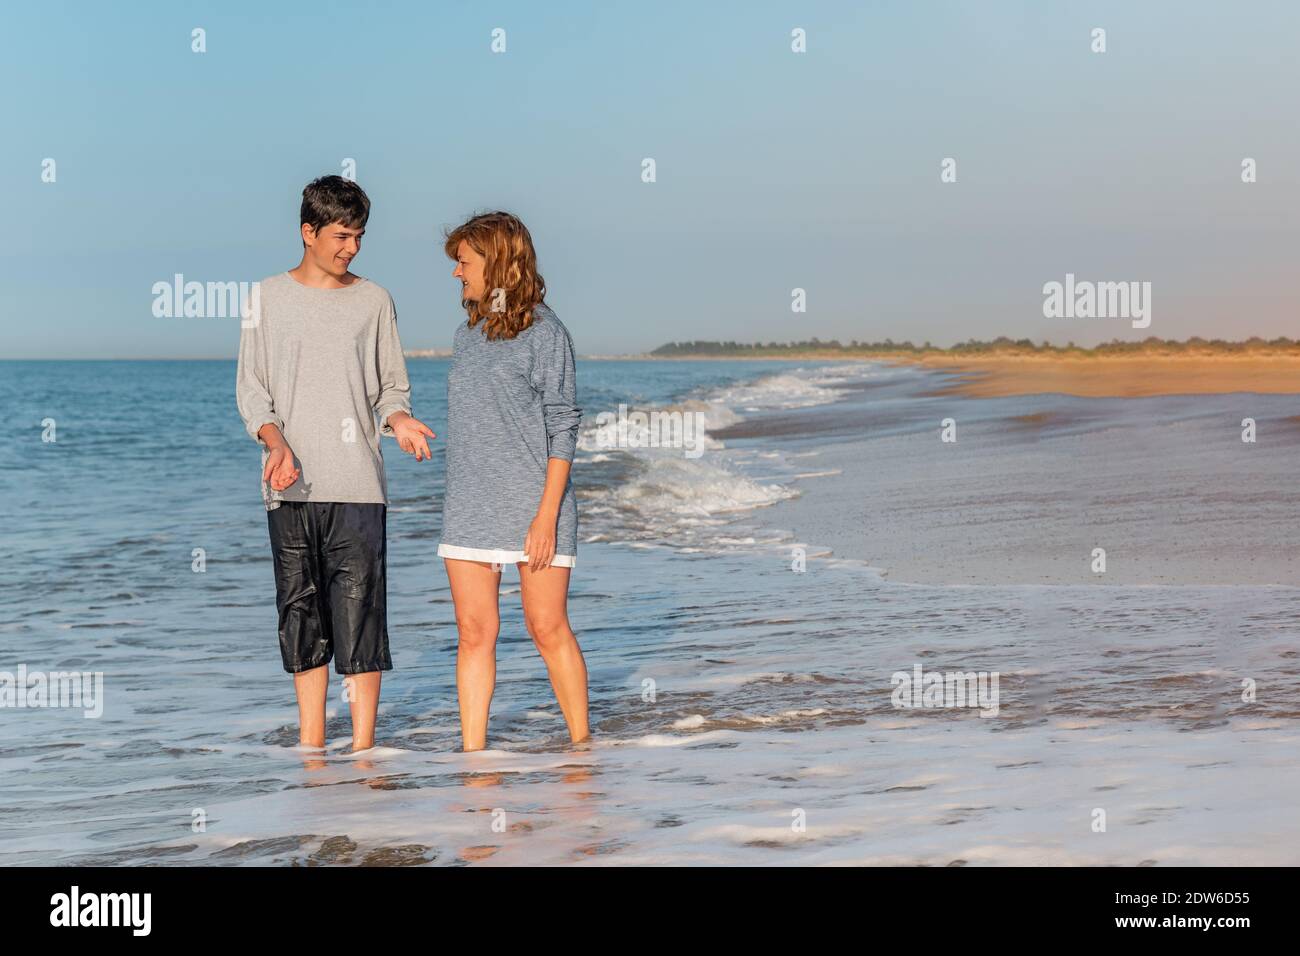 Woman playing with her son on the beach Stock Photo